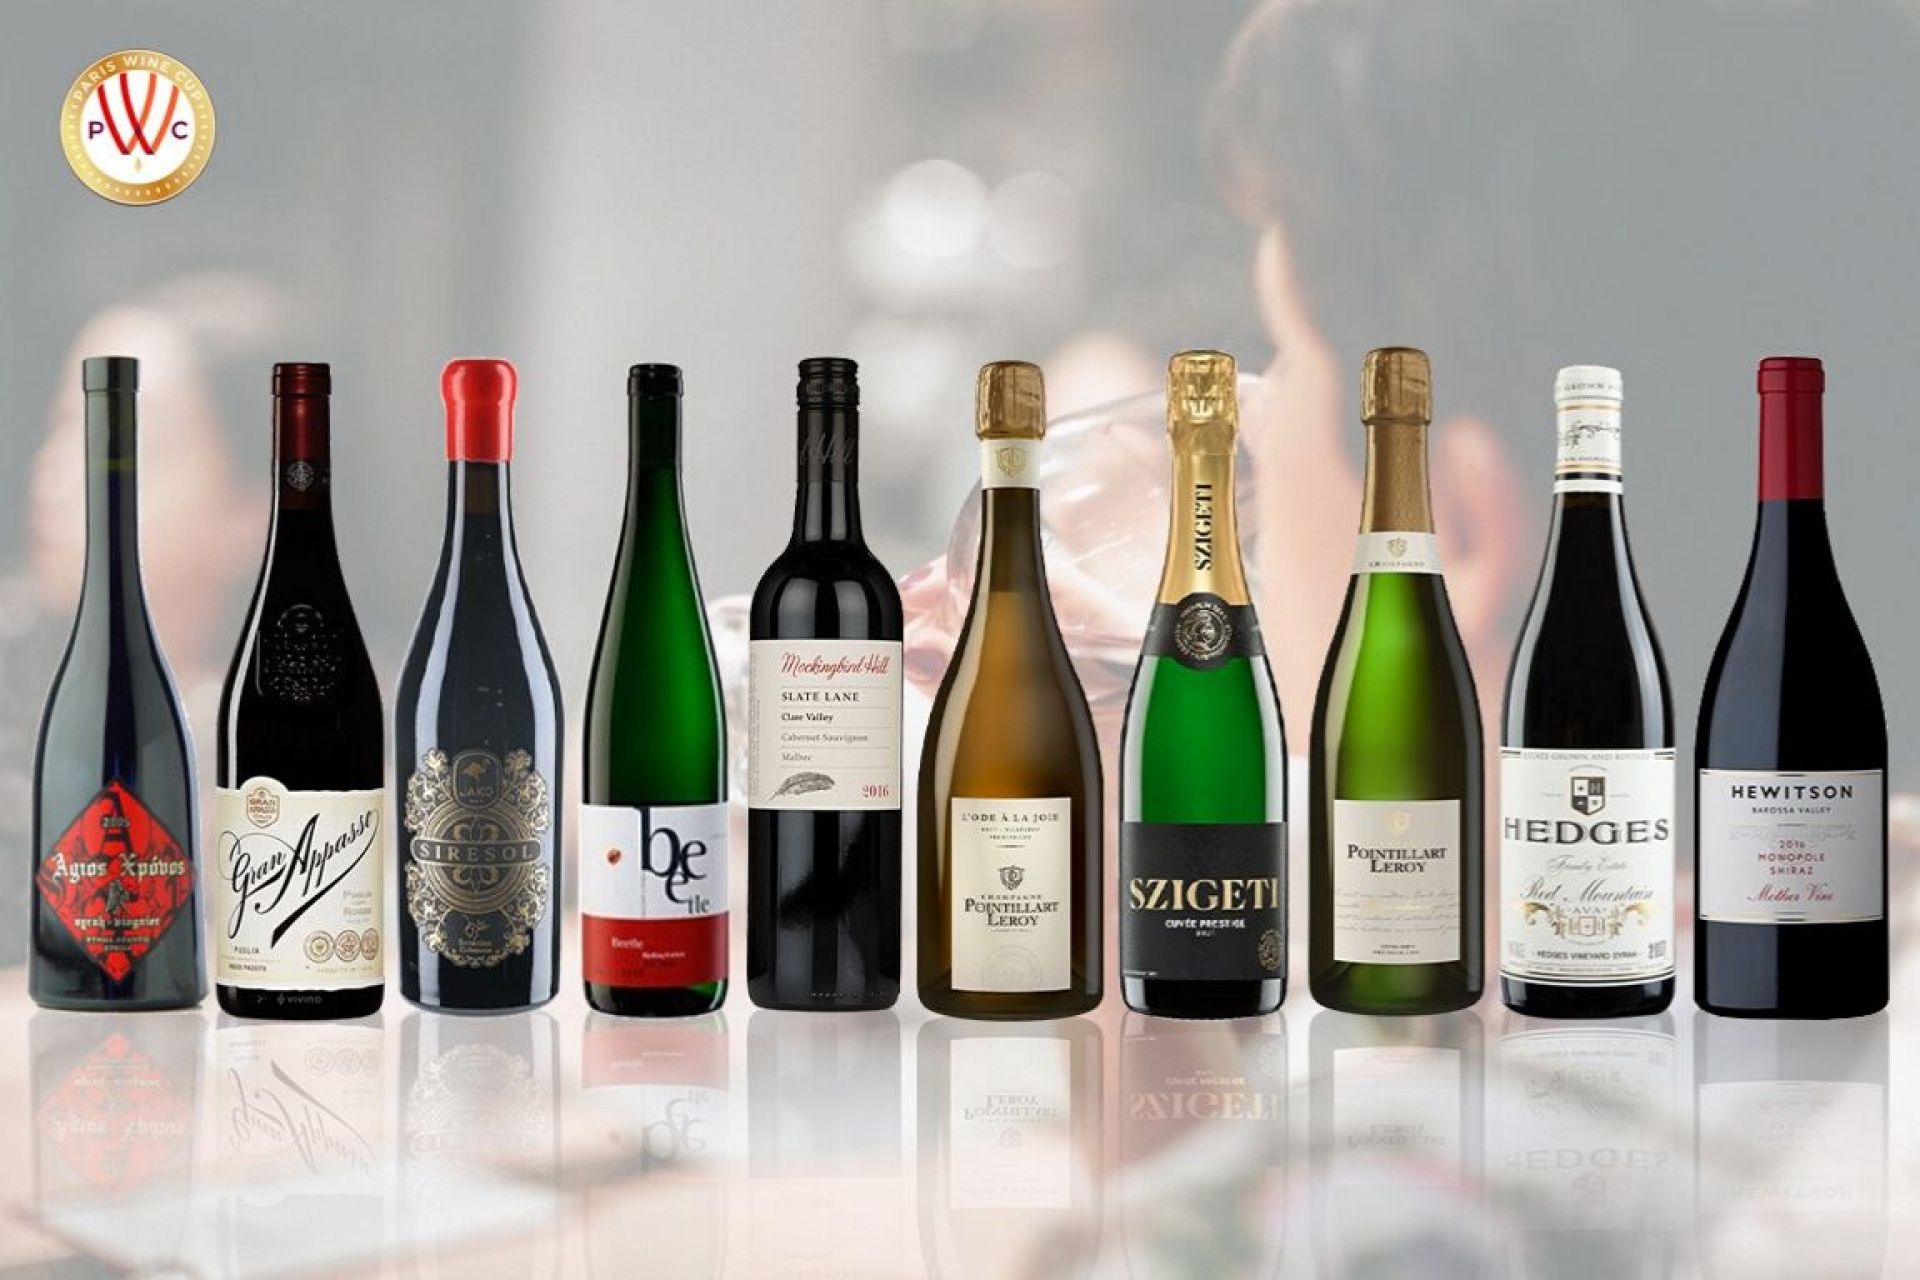 The 10 Wine Labels That Made The Emily In Paris Wine List